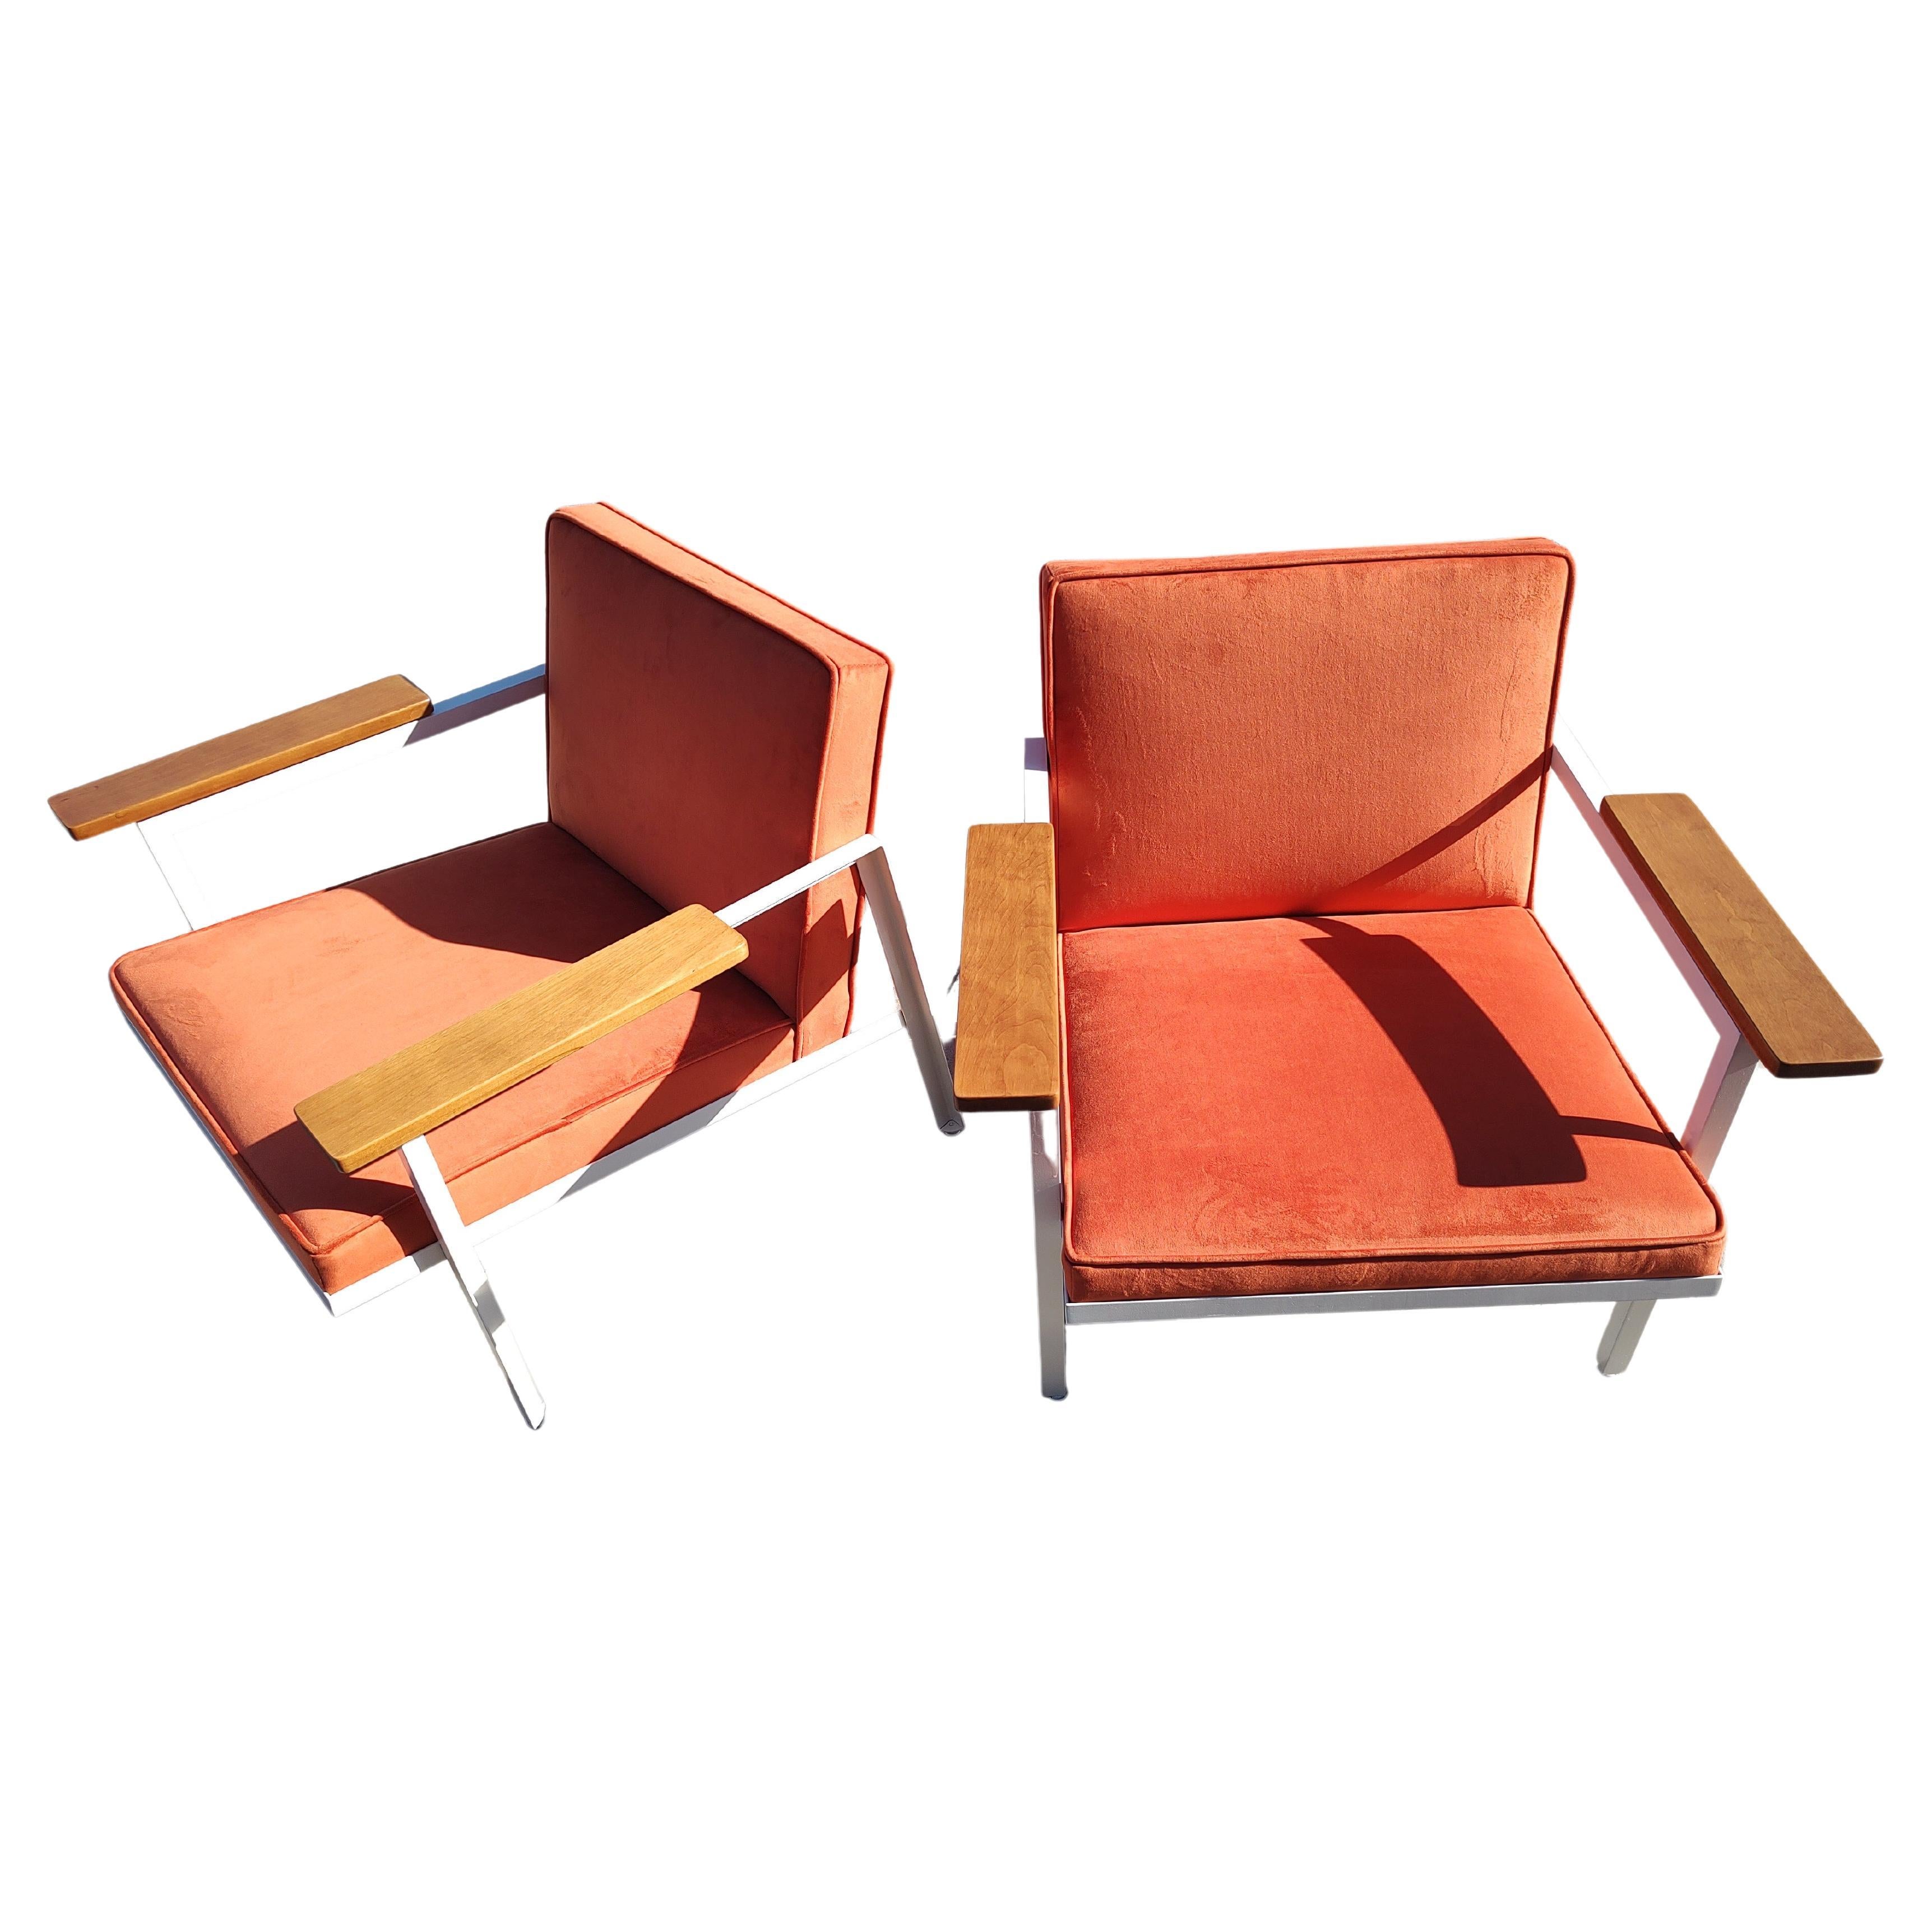 Spectacular and rare  early pair of steel framed lounge chairs, #5080 by George Nelson for Herman Miller. Totally restored to their original glory. New cotton velvet upholstery with all new foam, steel frames sand blasted and repainted white and the